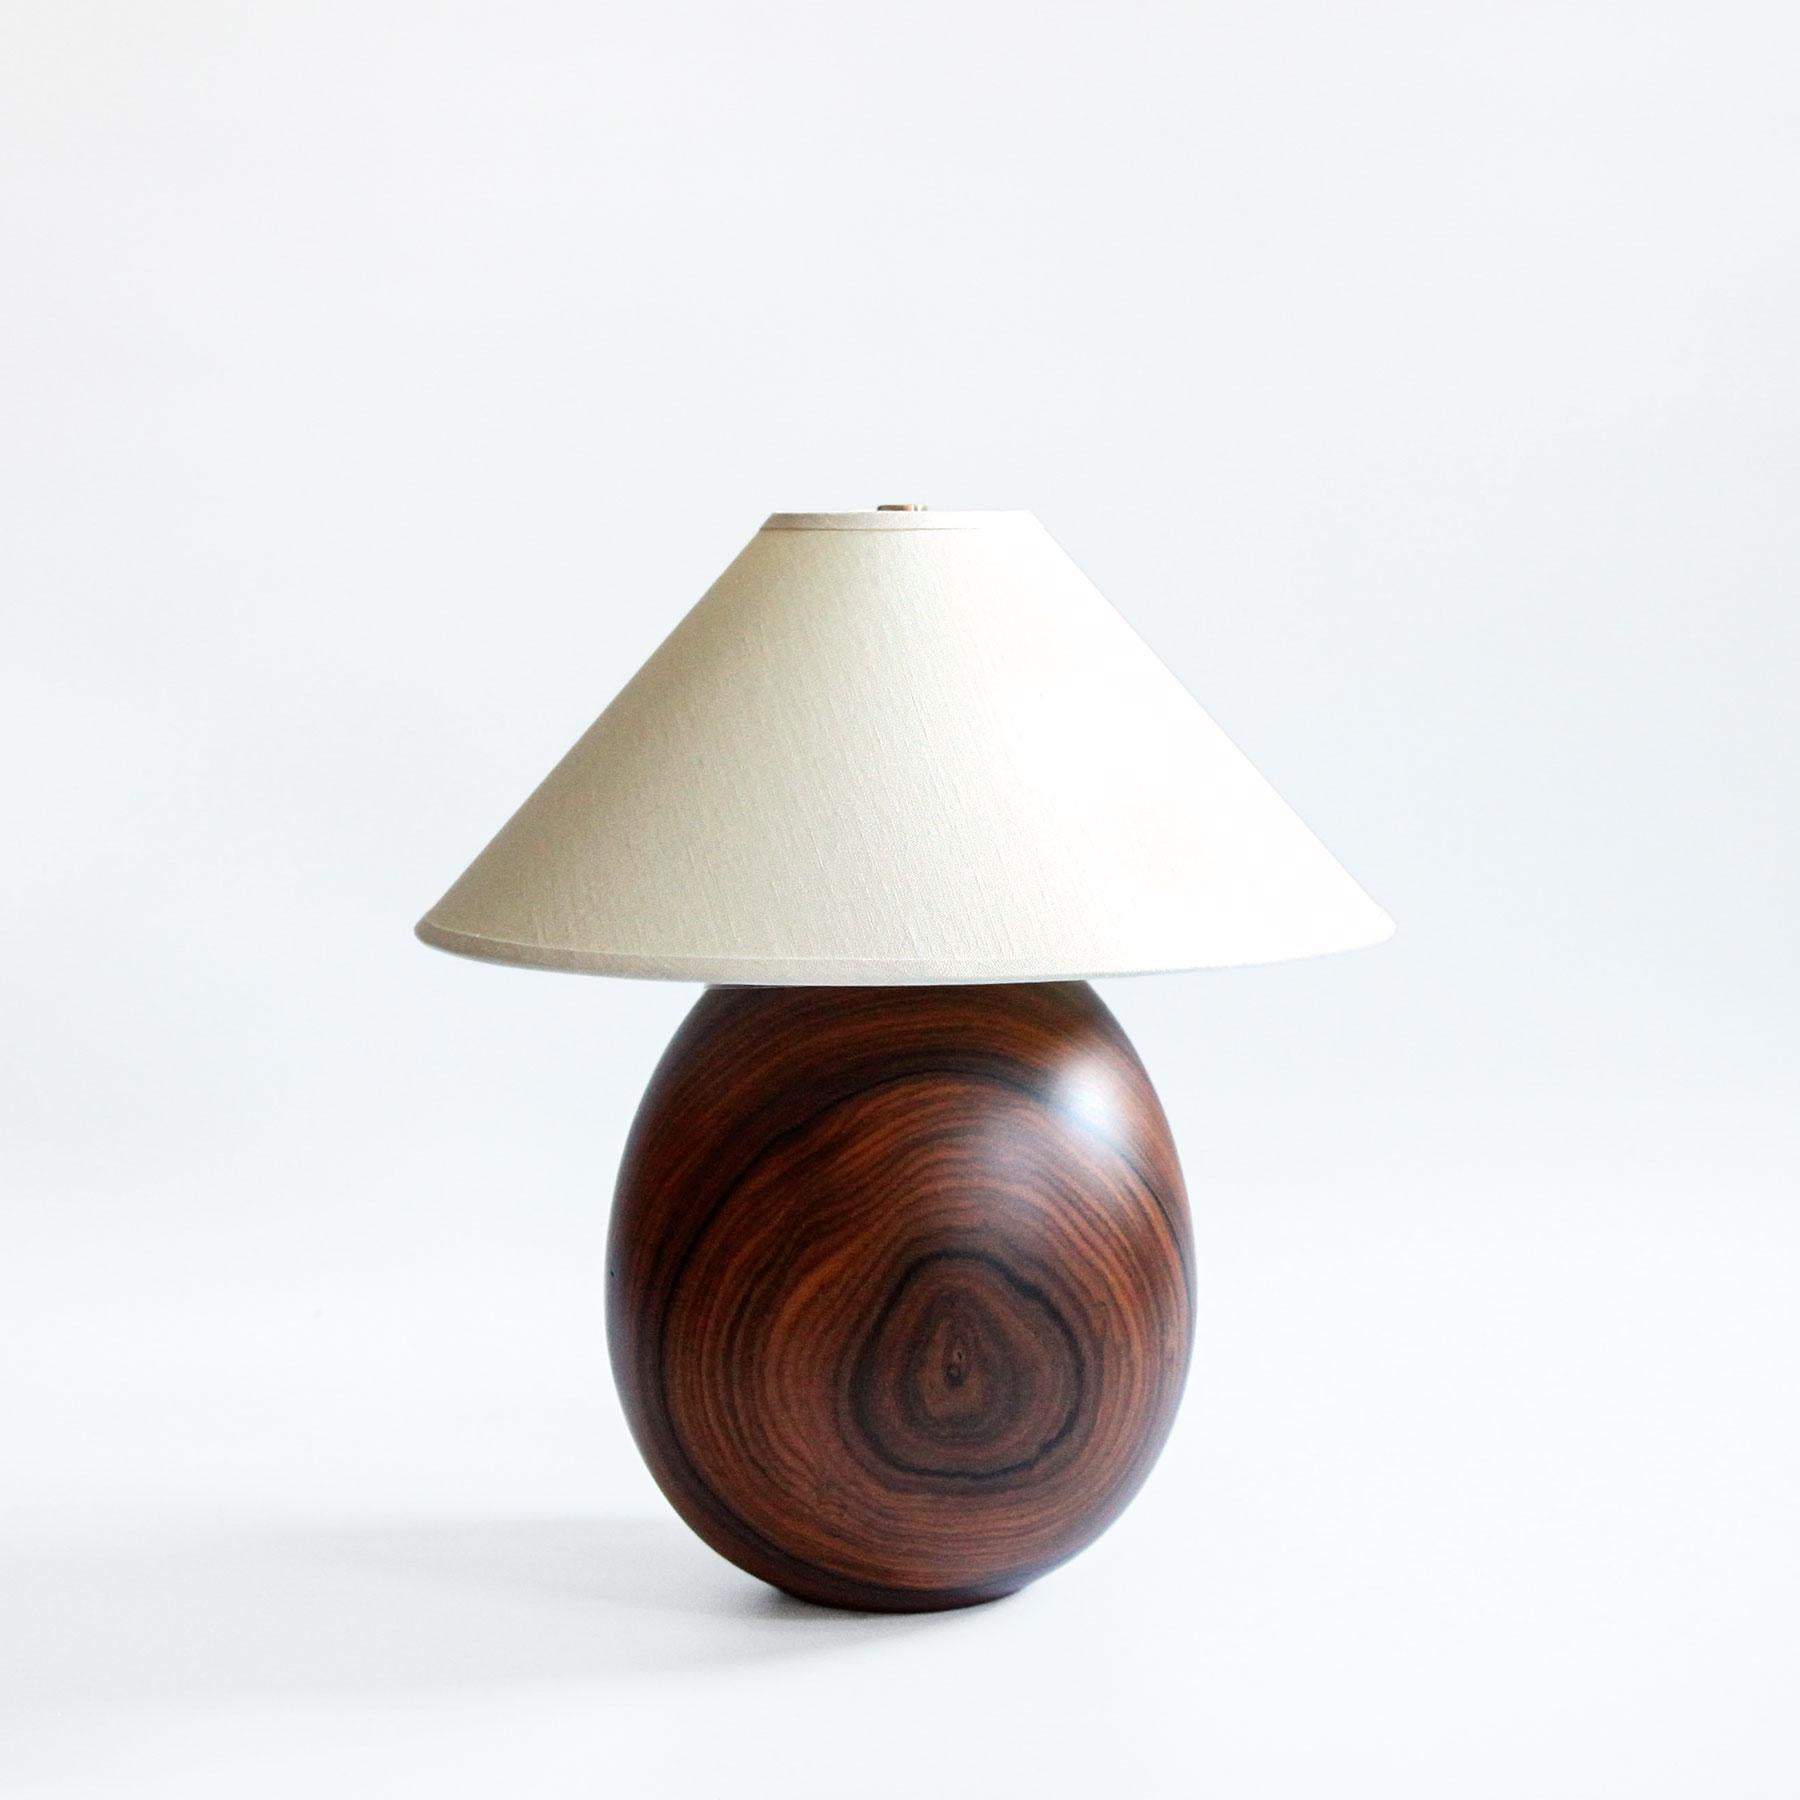 The Árbol collection is an embrace of tropical modernism; each lamp is composed of salvaged tropical hardwoods from the Bolivian city of Santa Cruz, where trees that are felled by natural causes—or for construction—are rescued by our team. A blend